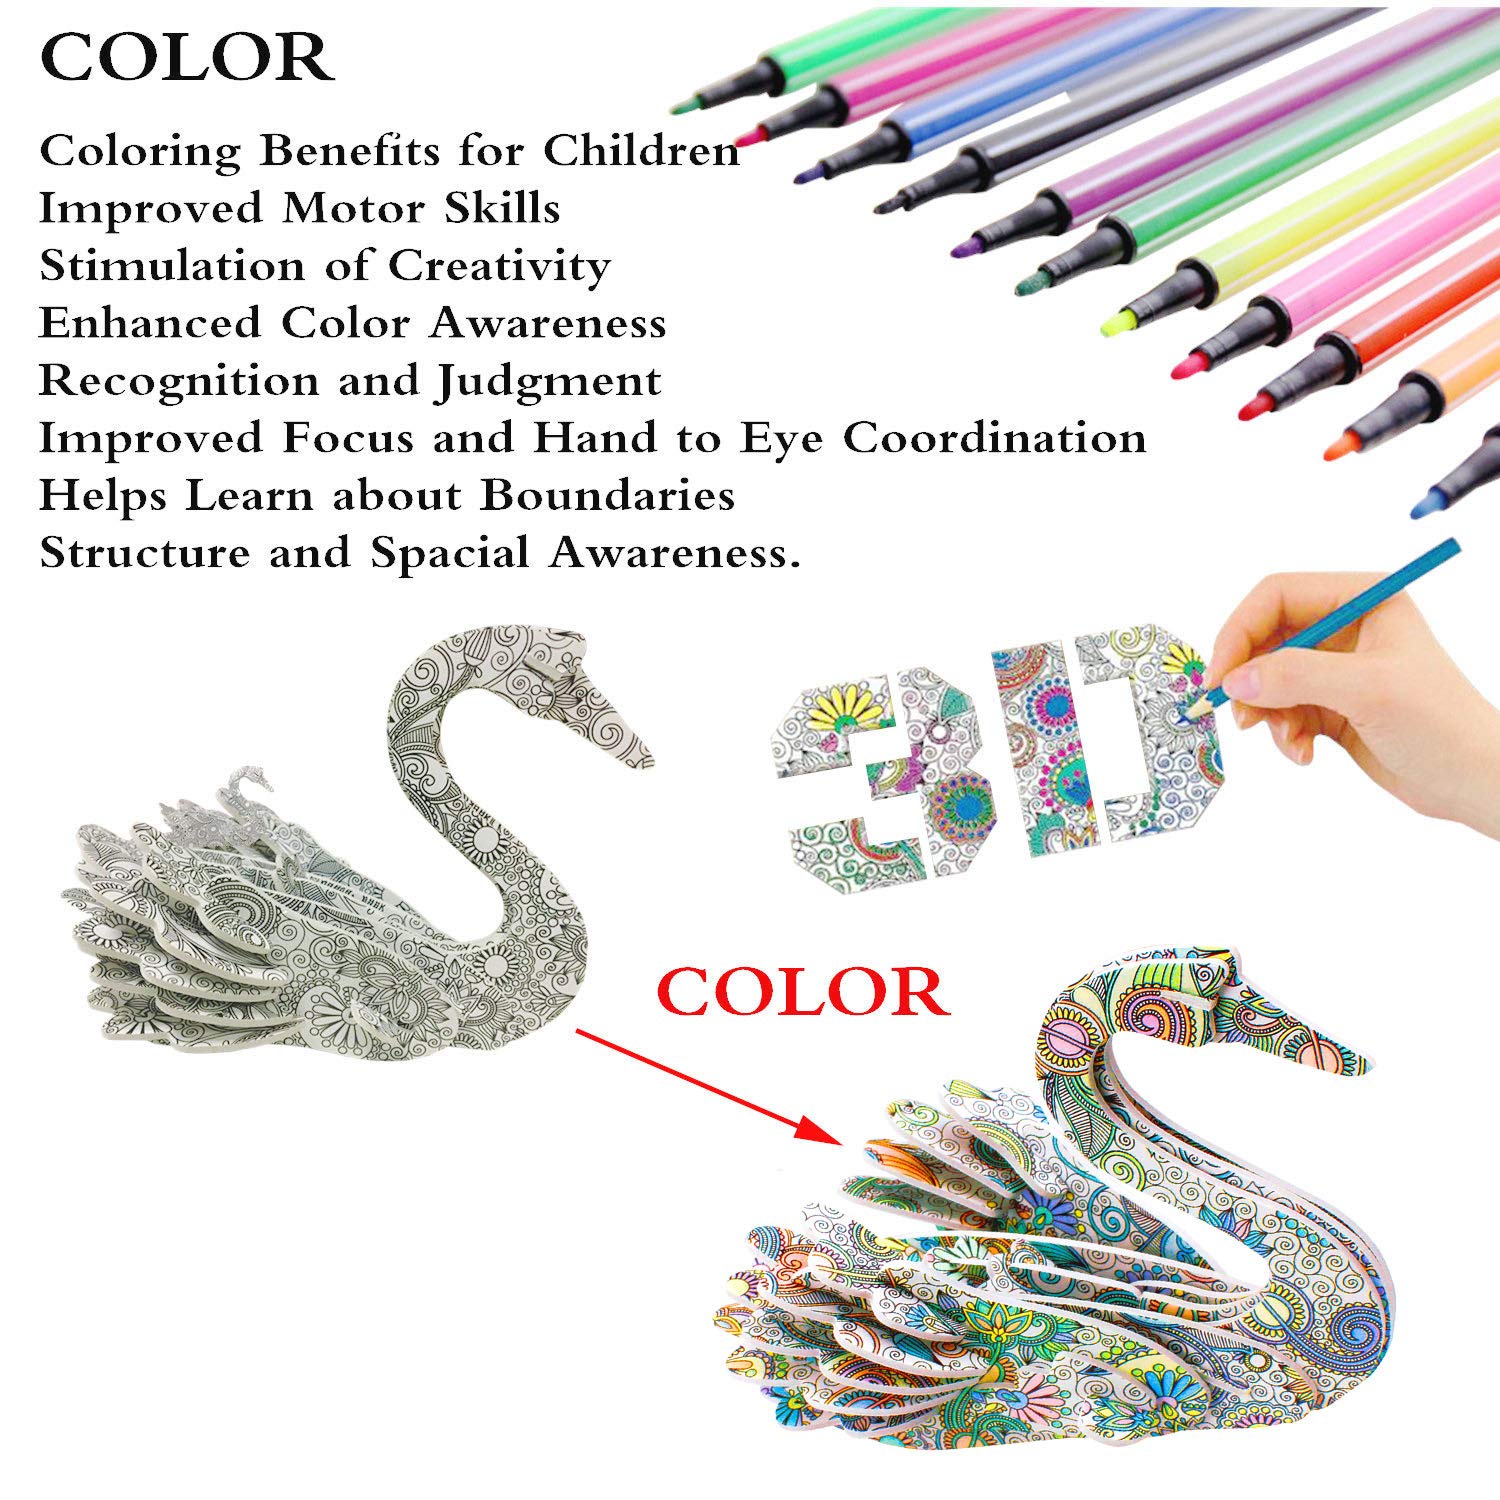 KAZOKU 3D Coloring Puzzle Set,4 Animals Puzzles with 12 Pen Markers, Art Coloring Painting 3D Puzzle for Kids Age 7 8 9 10 11 12. Fun Creative DIY Toys Gift for Girls and Boy